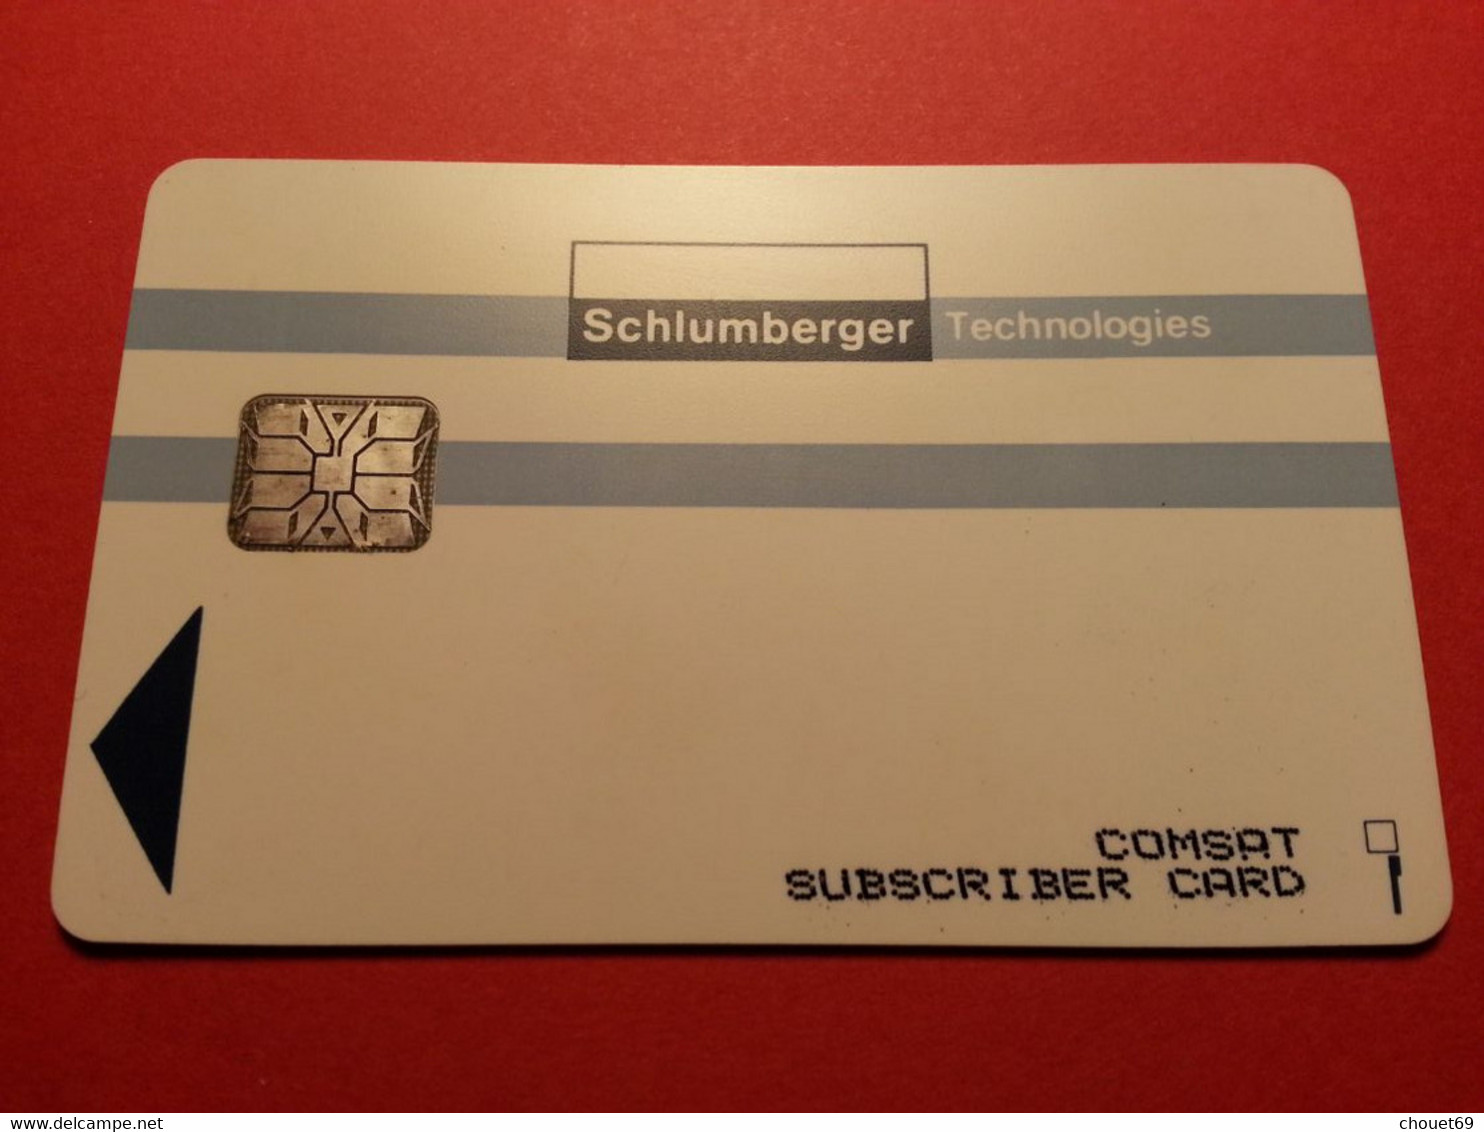 USA - Comsat Test - Subscriber Card Schlumberger Technologies Chip Card Test Trial Demo Proof (TB0322 - [2] Chip Cards